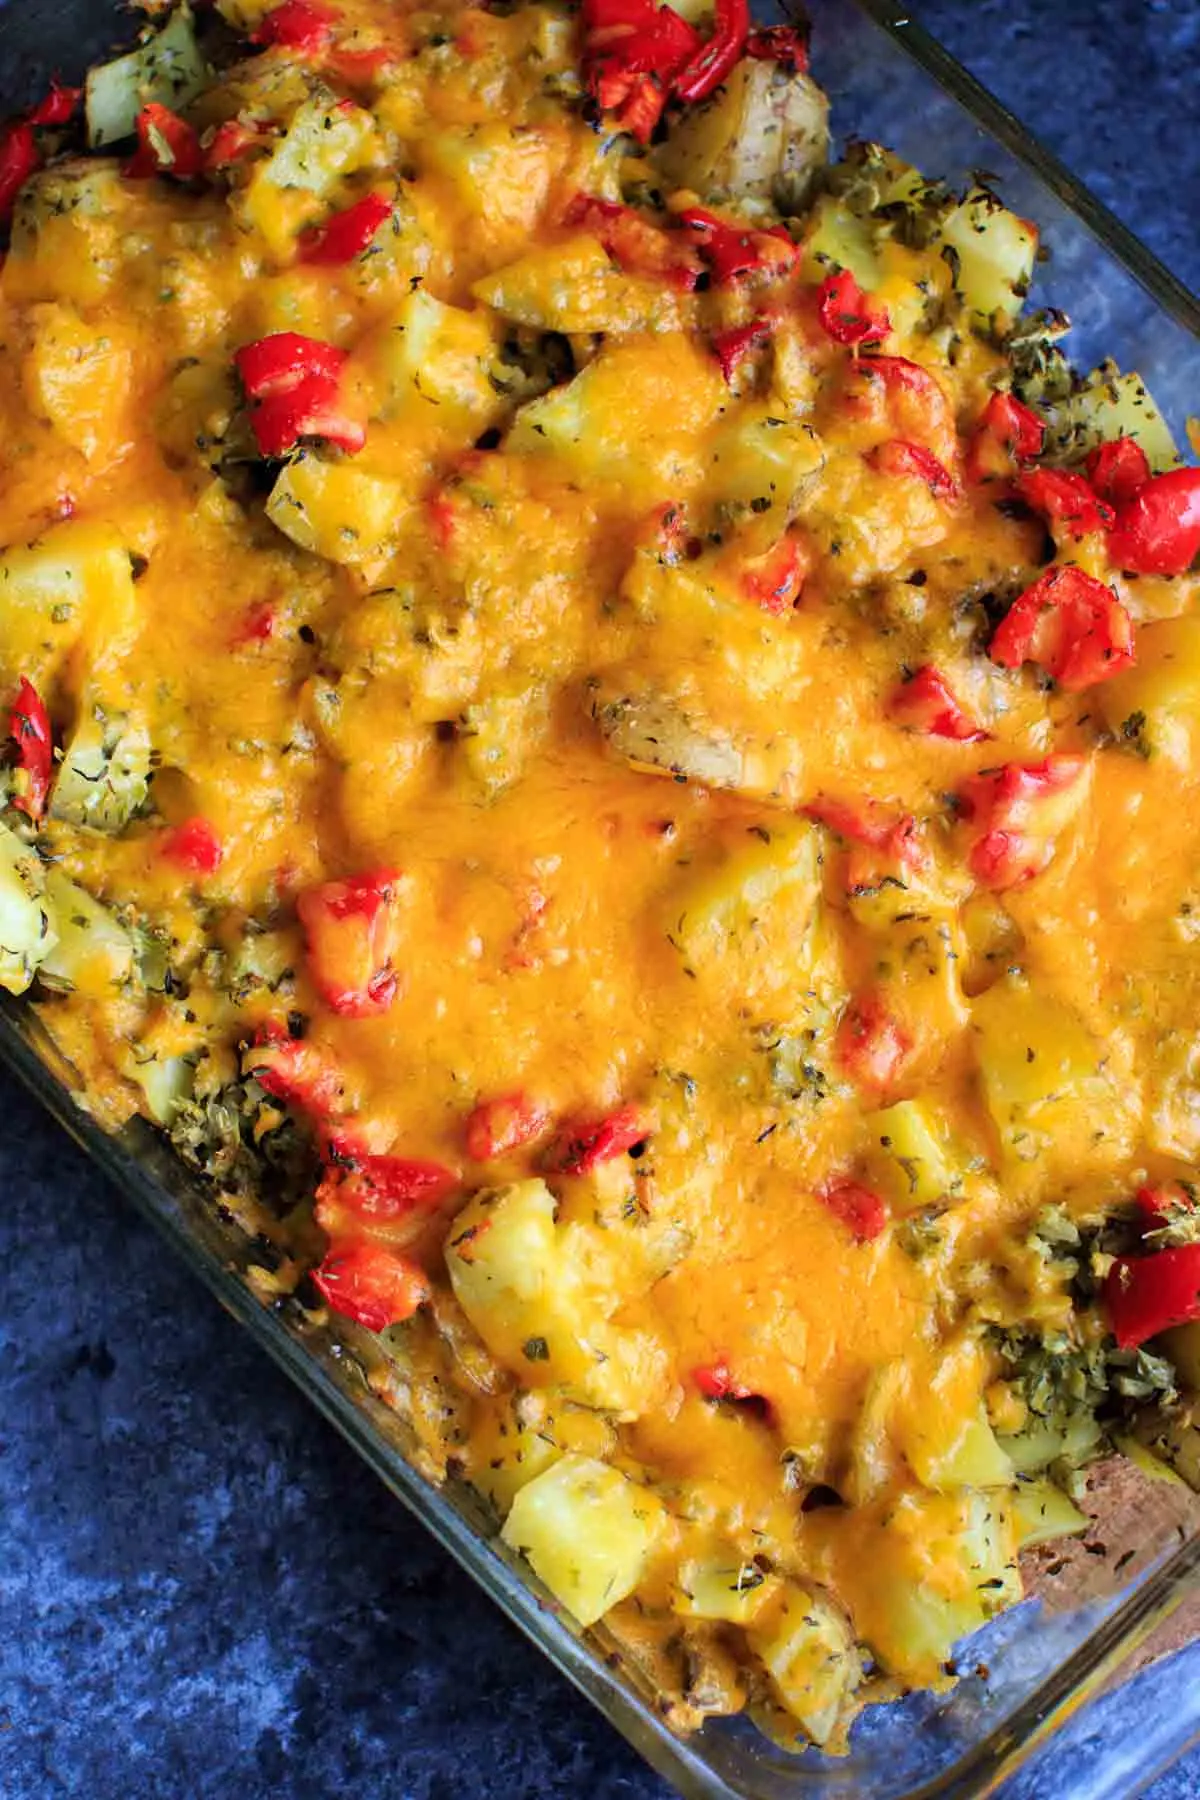 Broccoli and Cheese Baked Potato Casserole - Trial and Eater